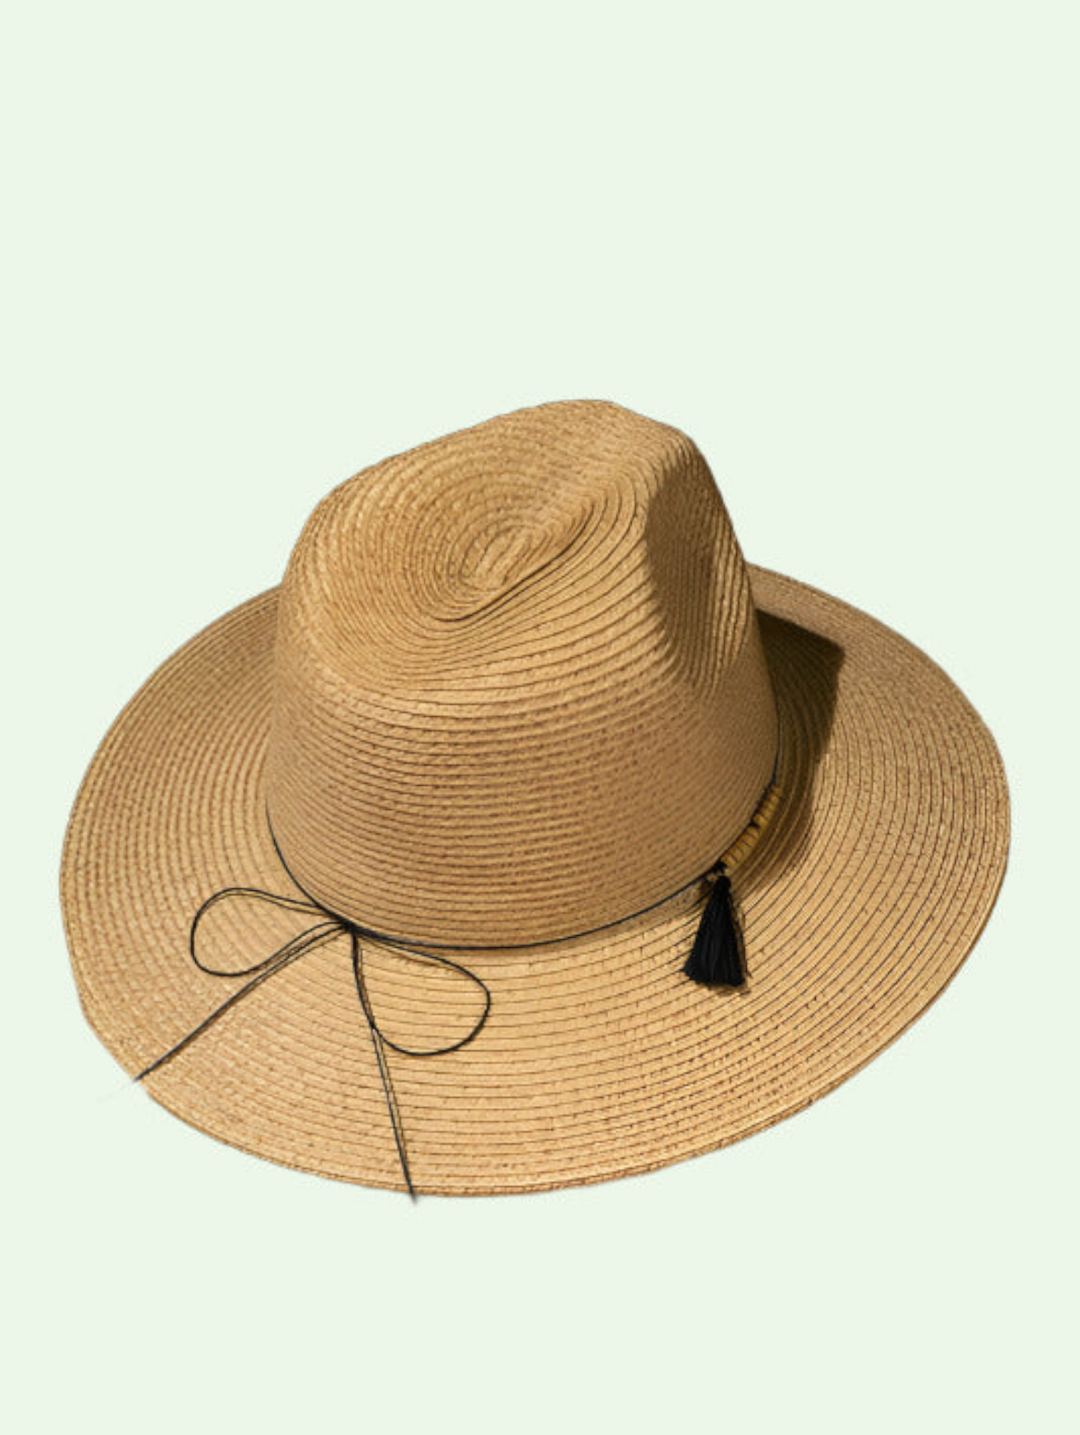 a natural color panama hat with a string and tassle decorating it